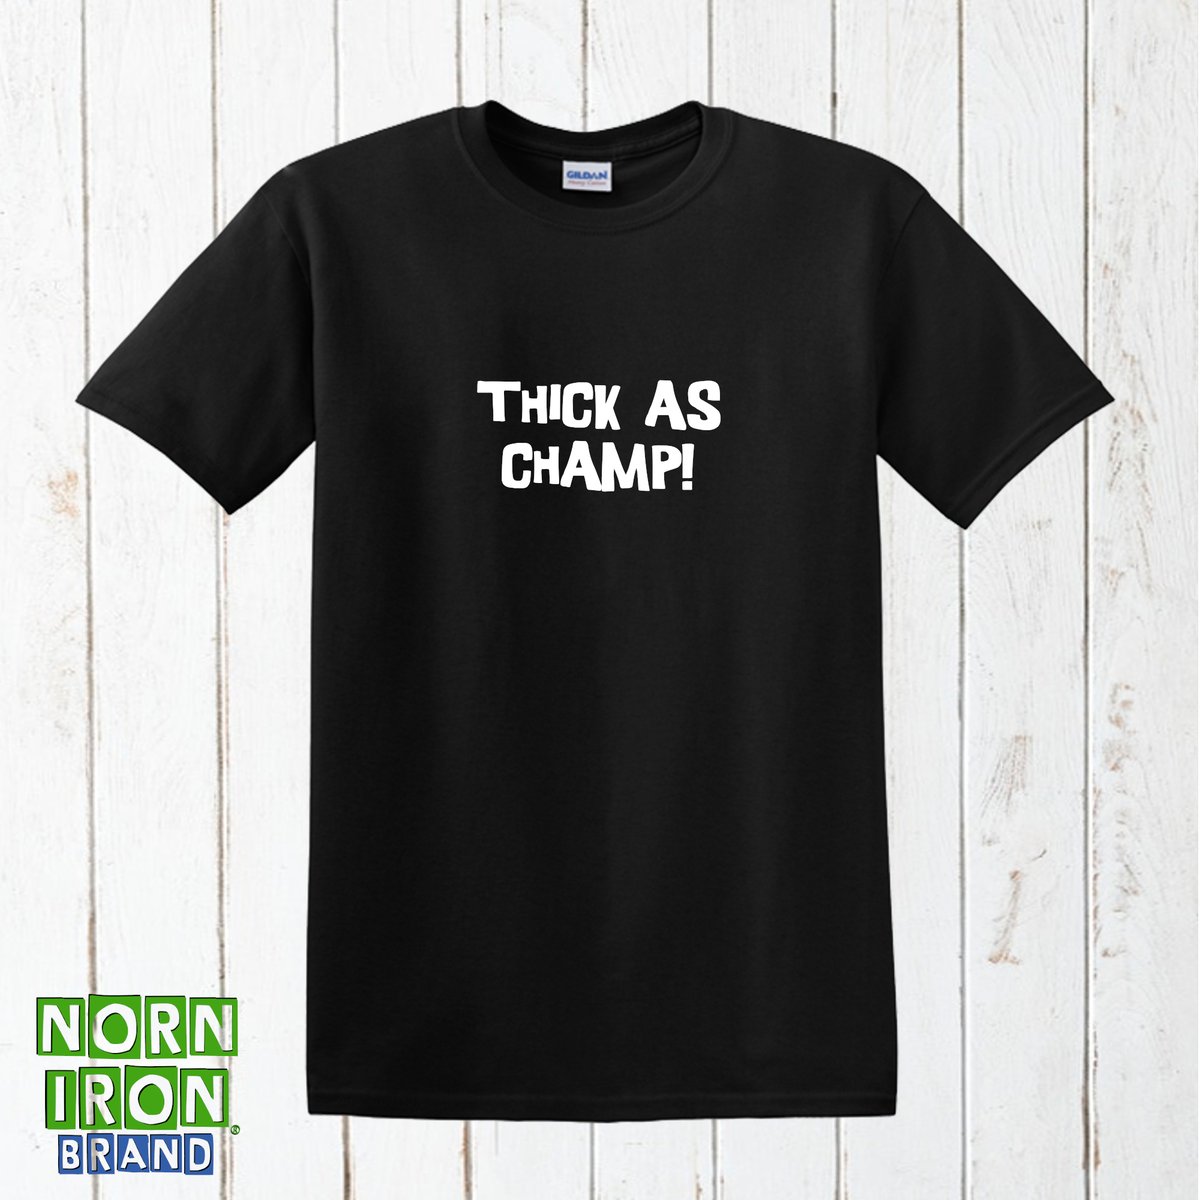 Thick As Champ! T-Shirt